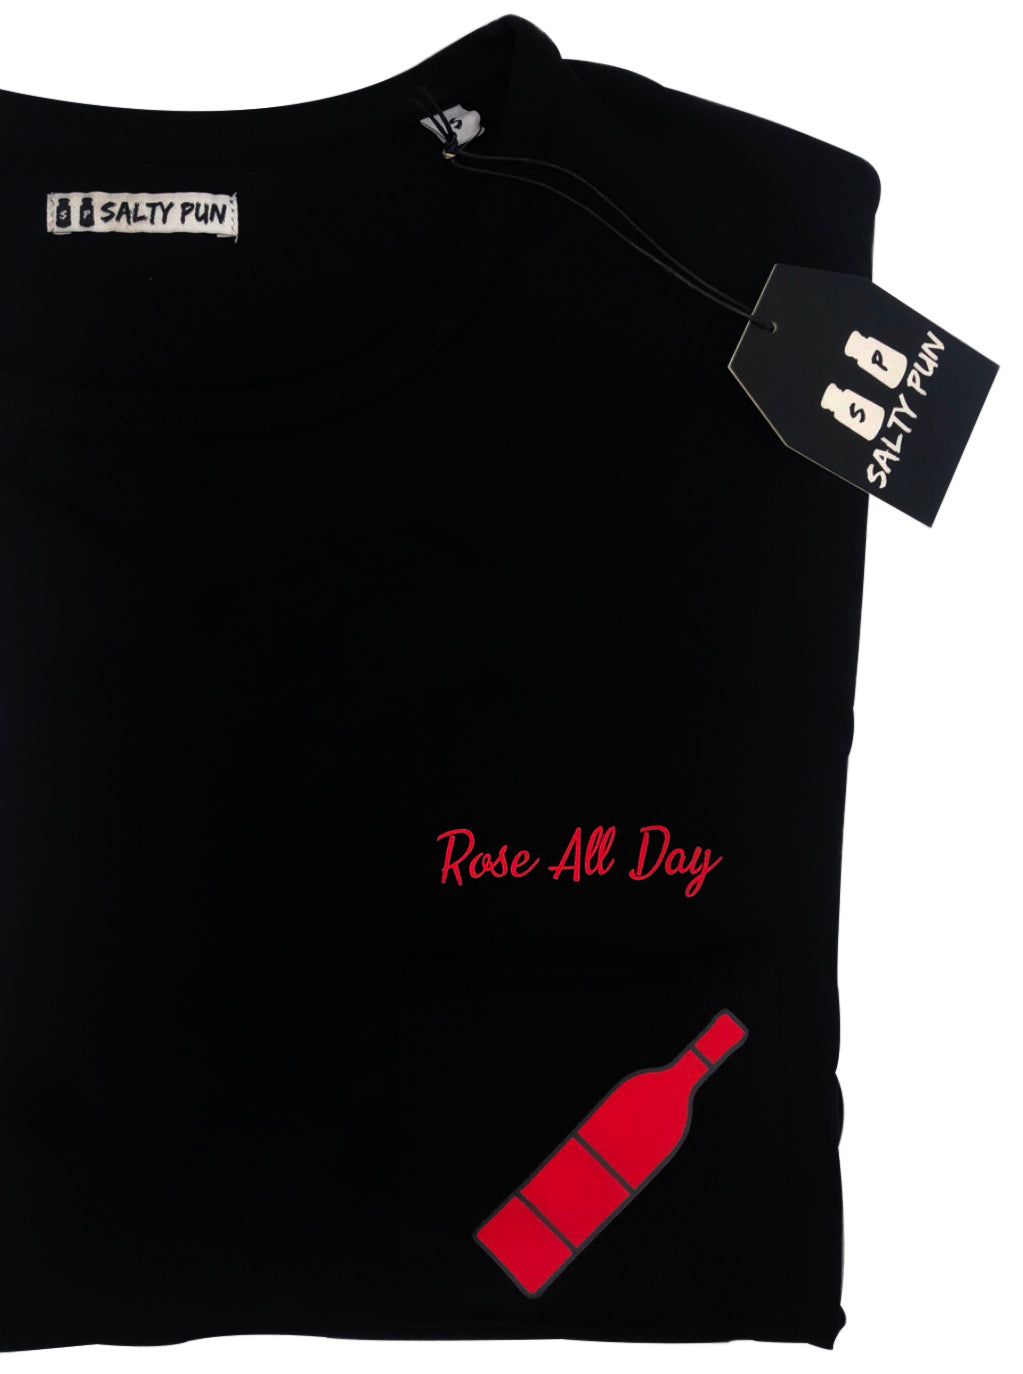 "Rose All Day" Tee 🦩